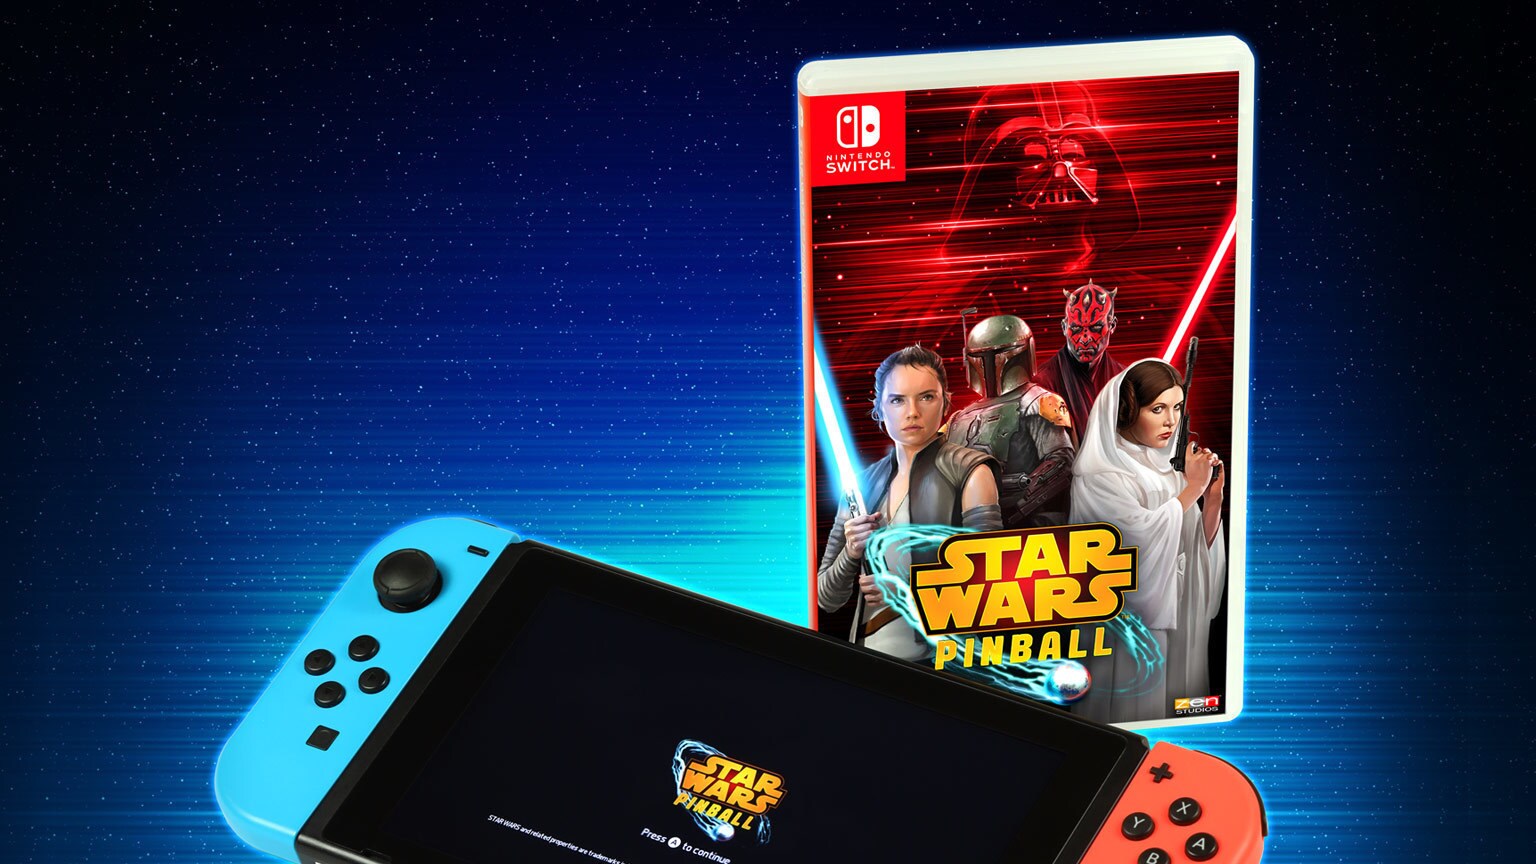 5 Reasons to Check Out Star Wars Pinball on Nintendo Switch